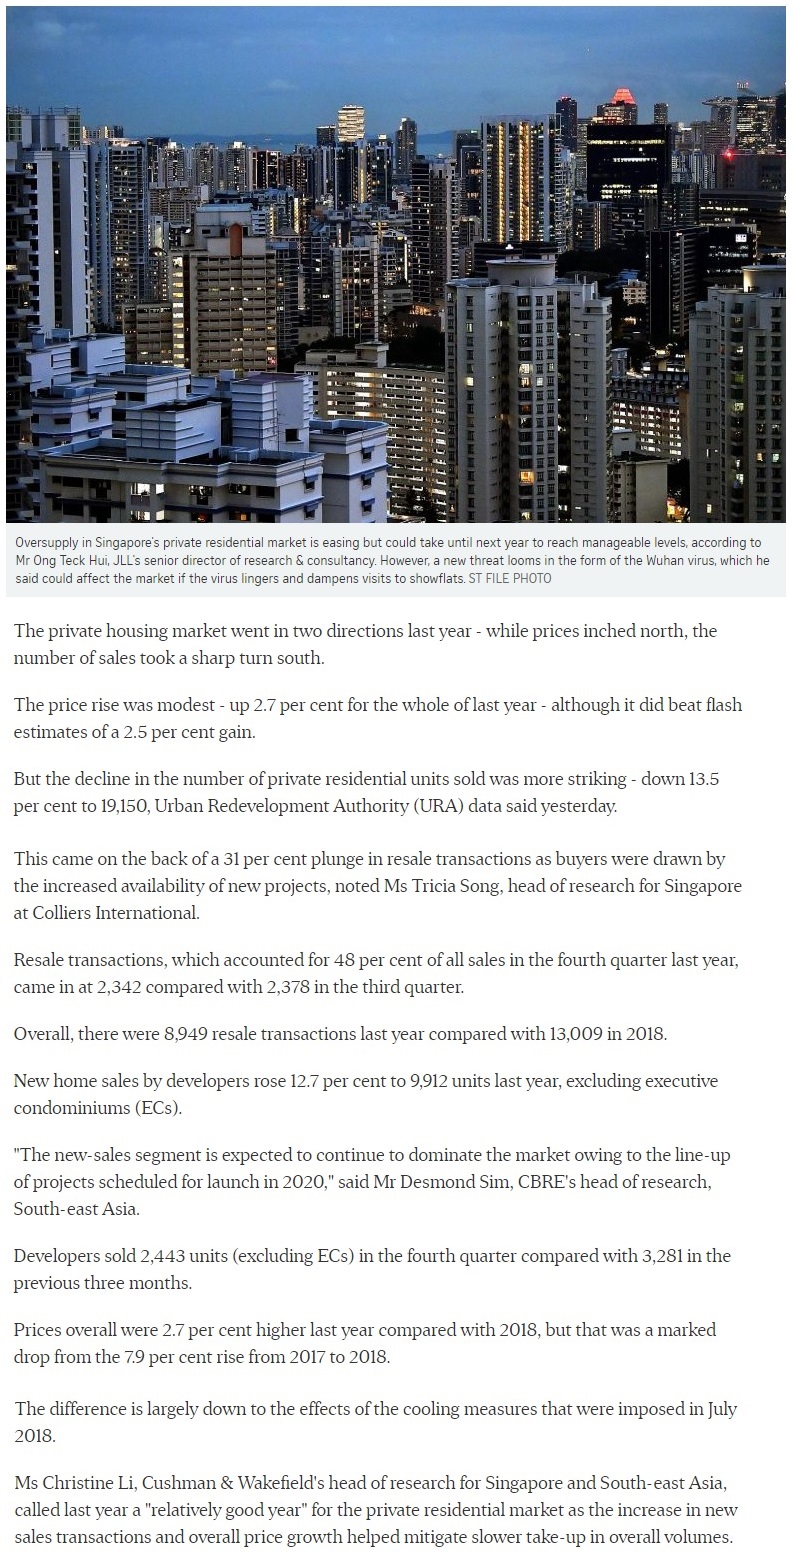 Cairnhill 16 - Singapore private home prices inch up 2.7% for 2019 Part 1